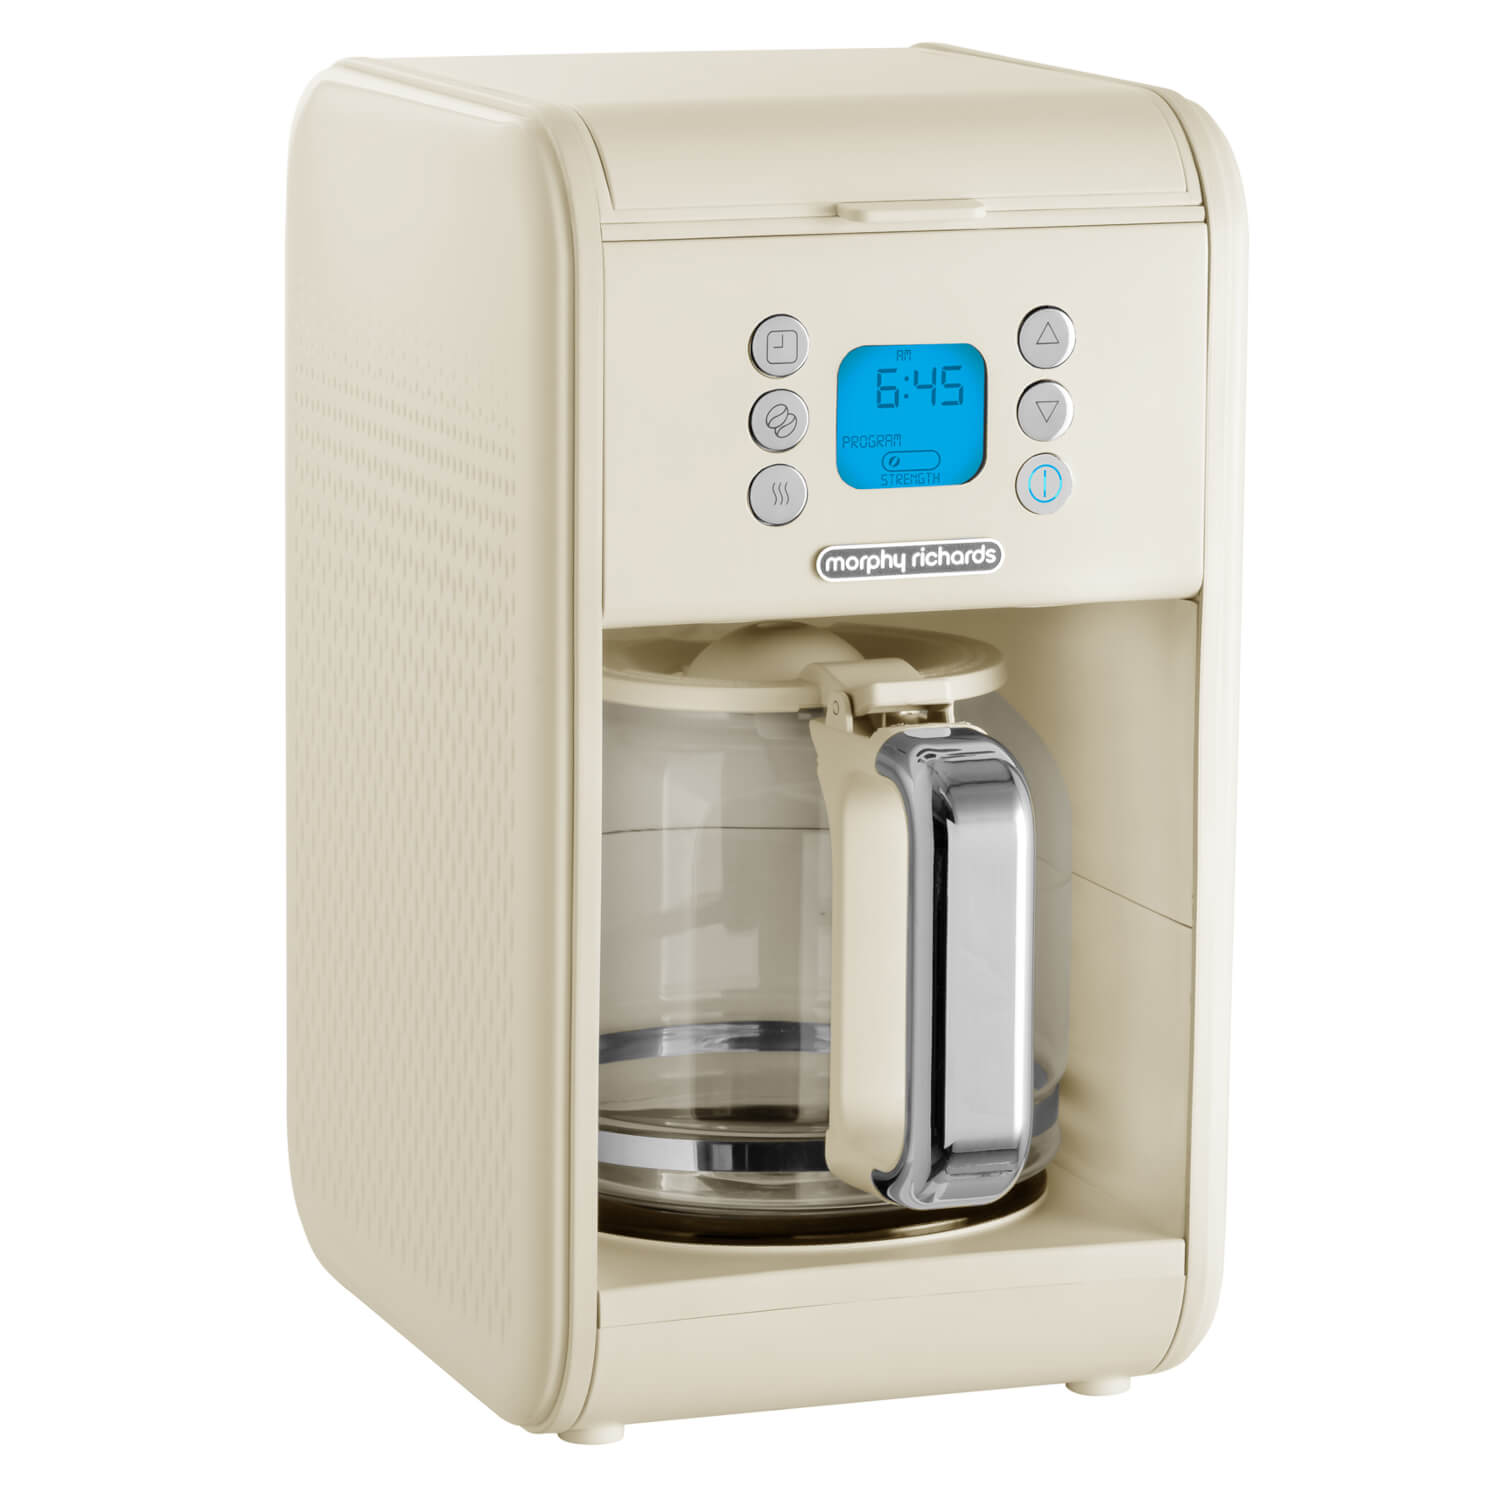 Morphy Richards Verve Coffee Maker 1.8L - Cream | 163006 1 Shaws Department Stores